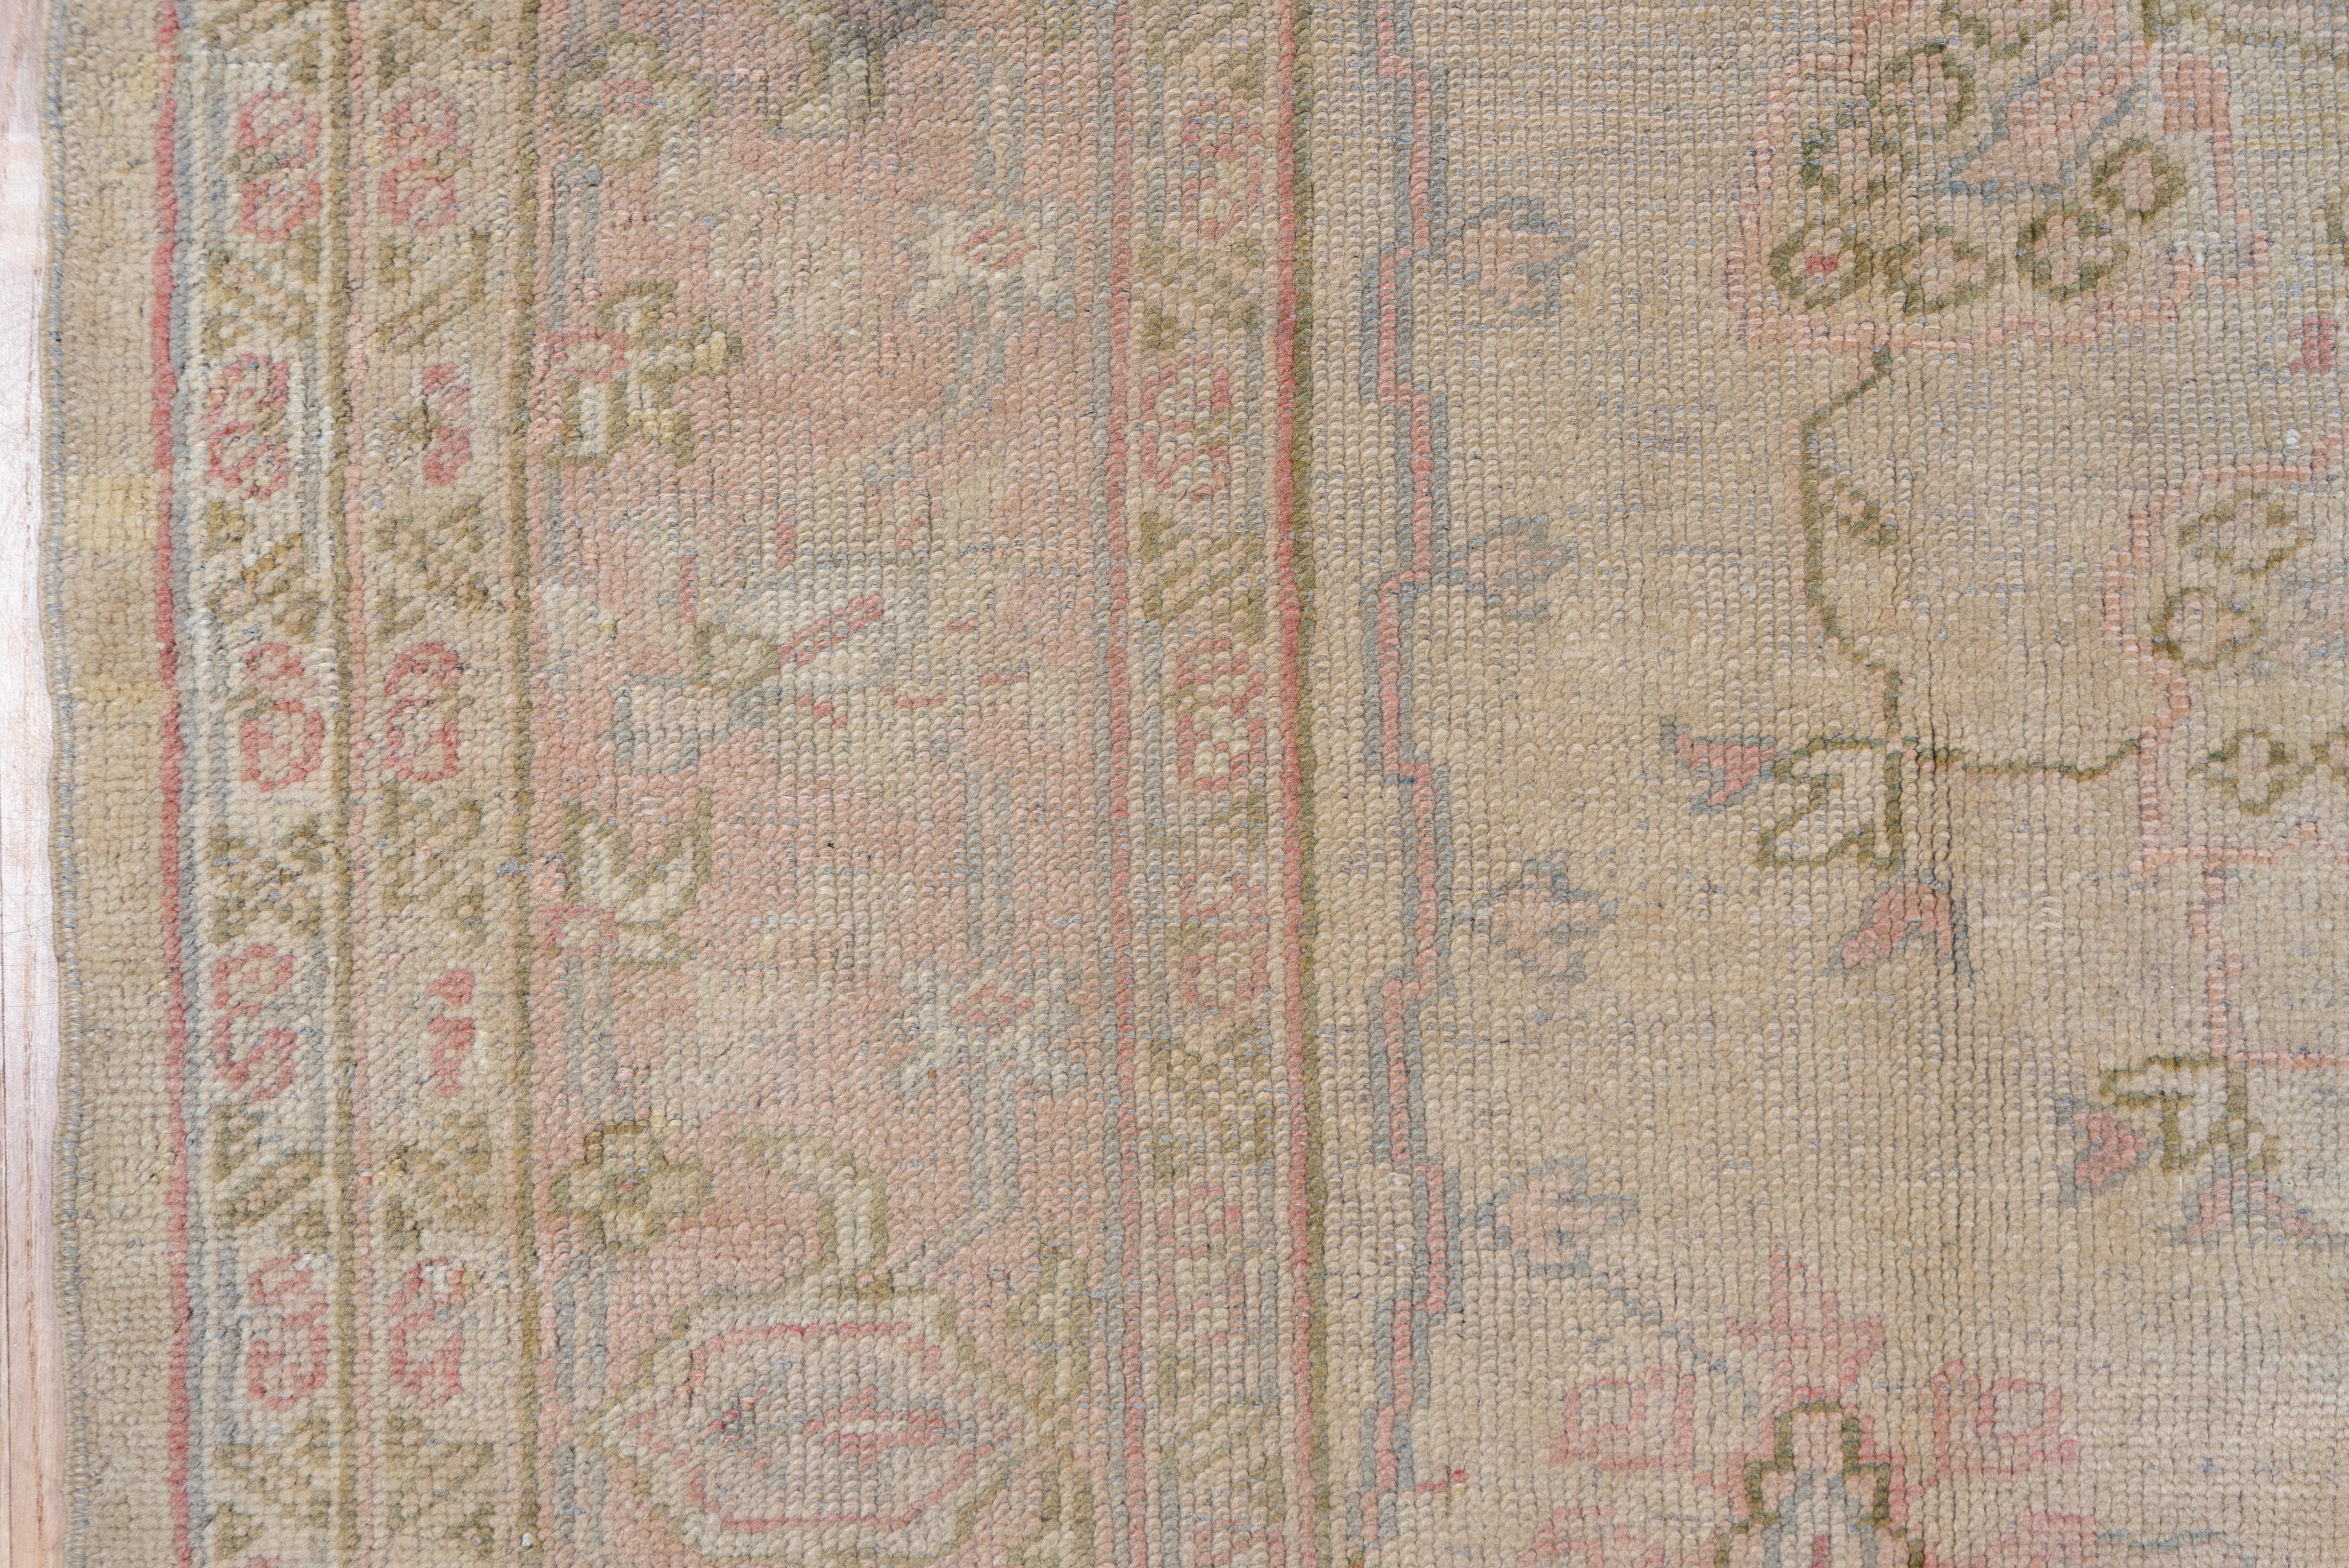 The cream pink sub- field shows an open layout of short floral sprays around an off-white small medallion. Powder border with widely spaced geometric palmettes. Coarse weave, slight all-over pile wear. Generally soft palette.